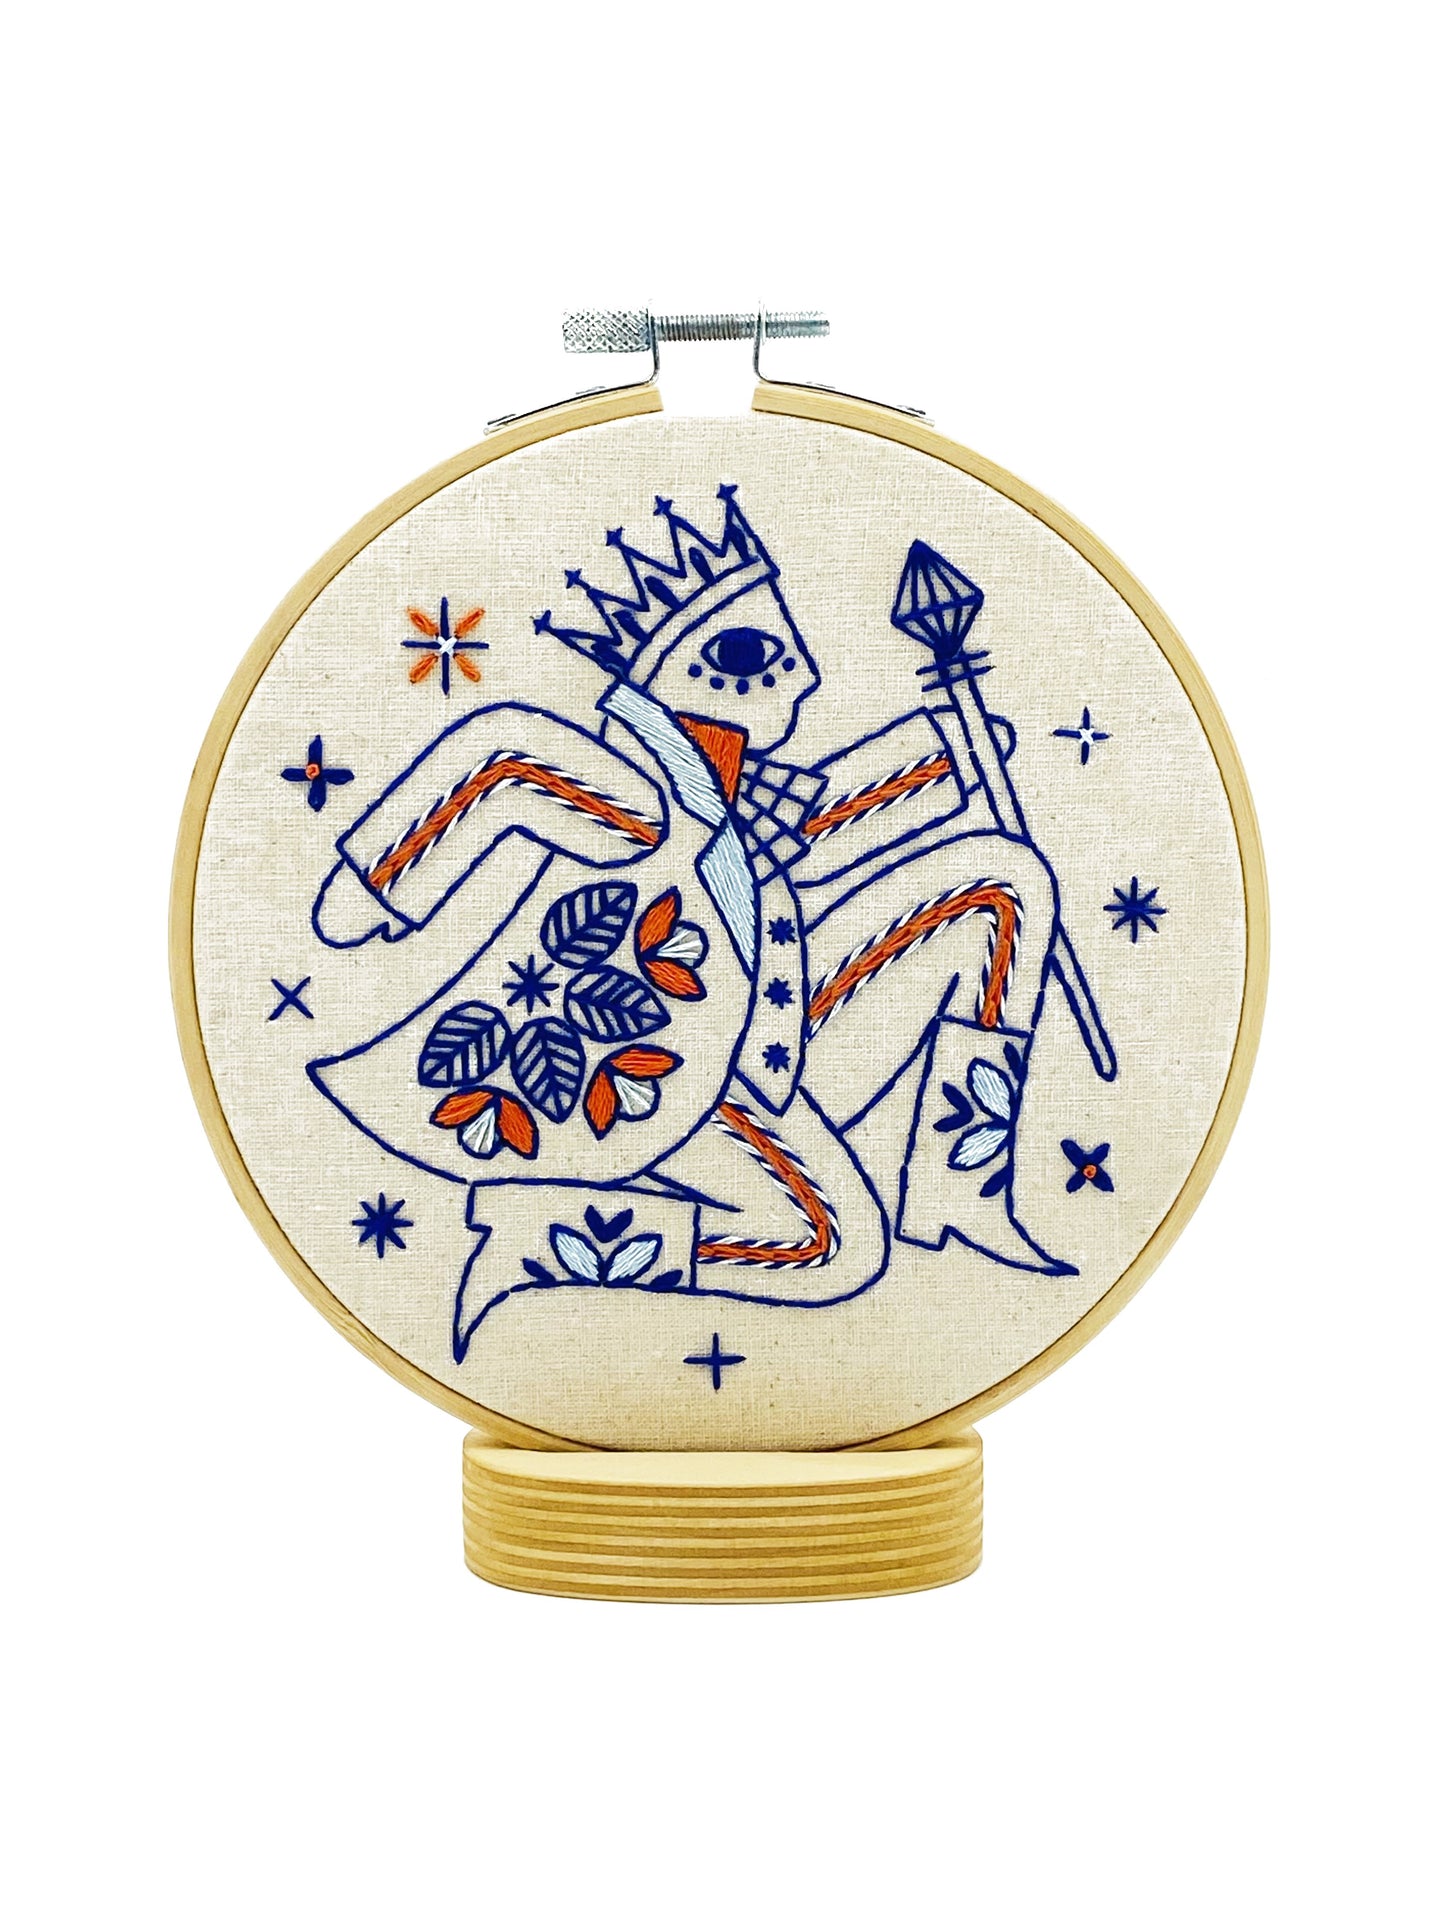 Lord of Leaping Complete Embroidery Kit